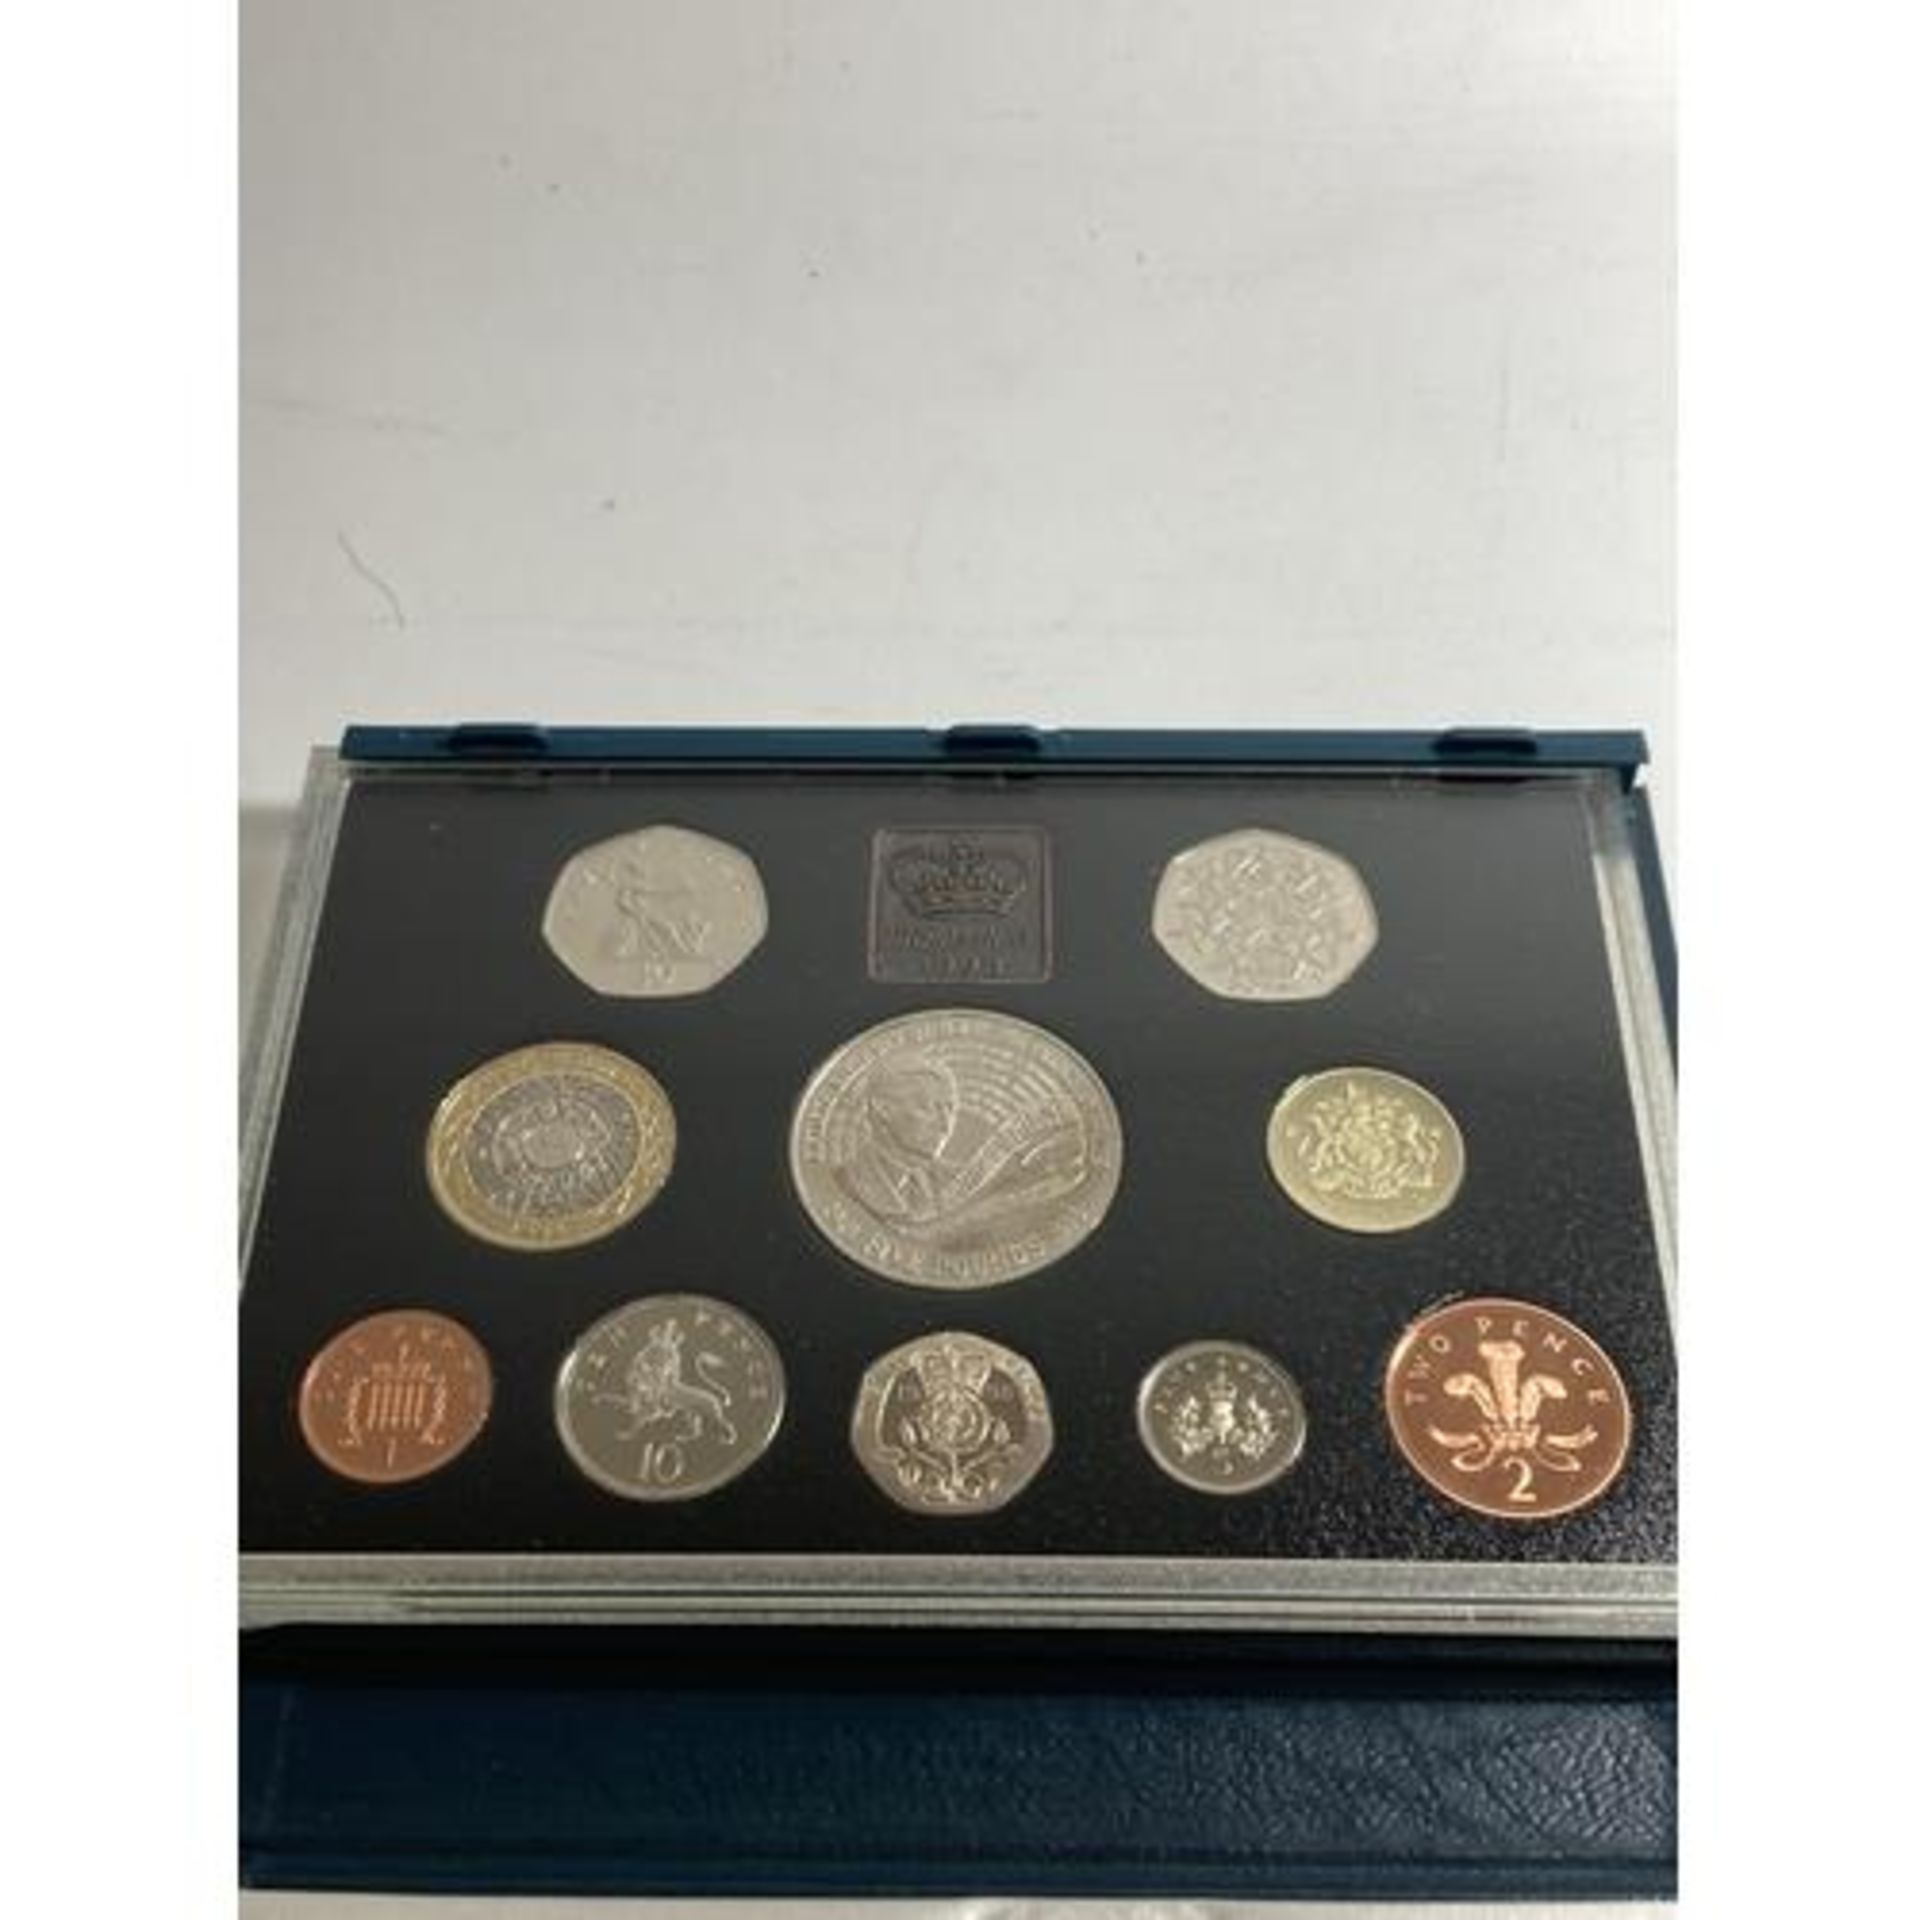 THE ROYAL MINT 1998 PROOF COIN COLLECTION WITH COA - Image 2 of 2